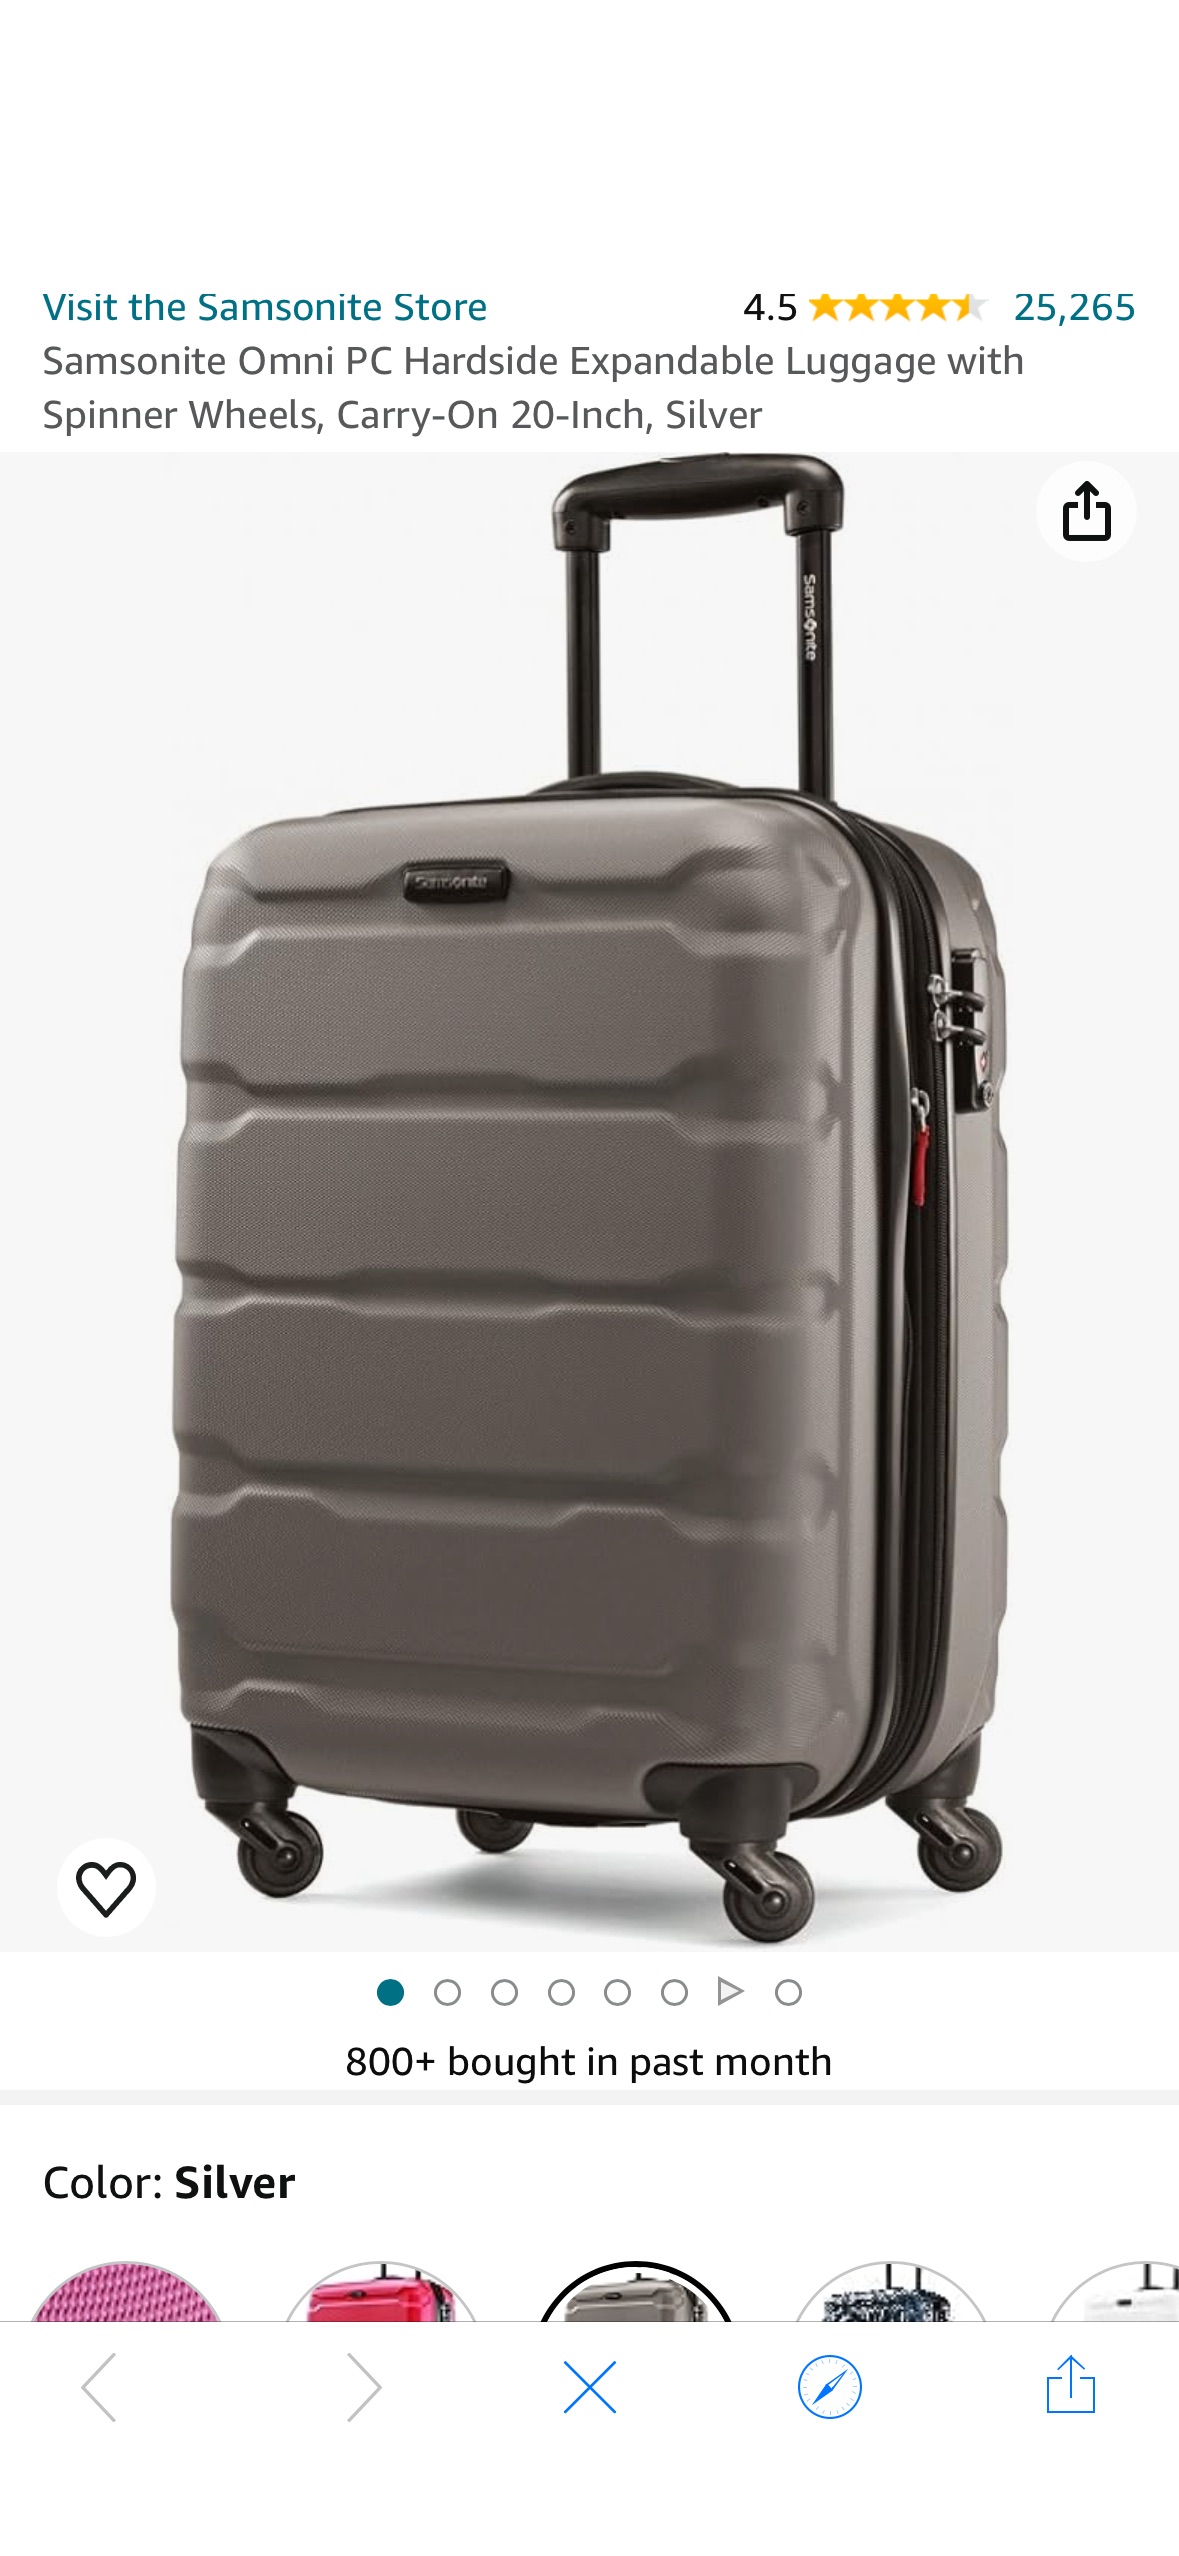 Amazon.com | Samsonite Omni PC Hardside Expandable Luggage with Spinner Wheels, Carry-On 20-Inch, Silver | Carry-Ons